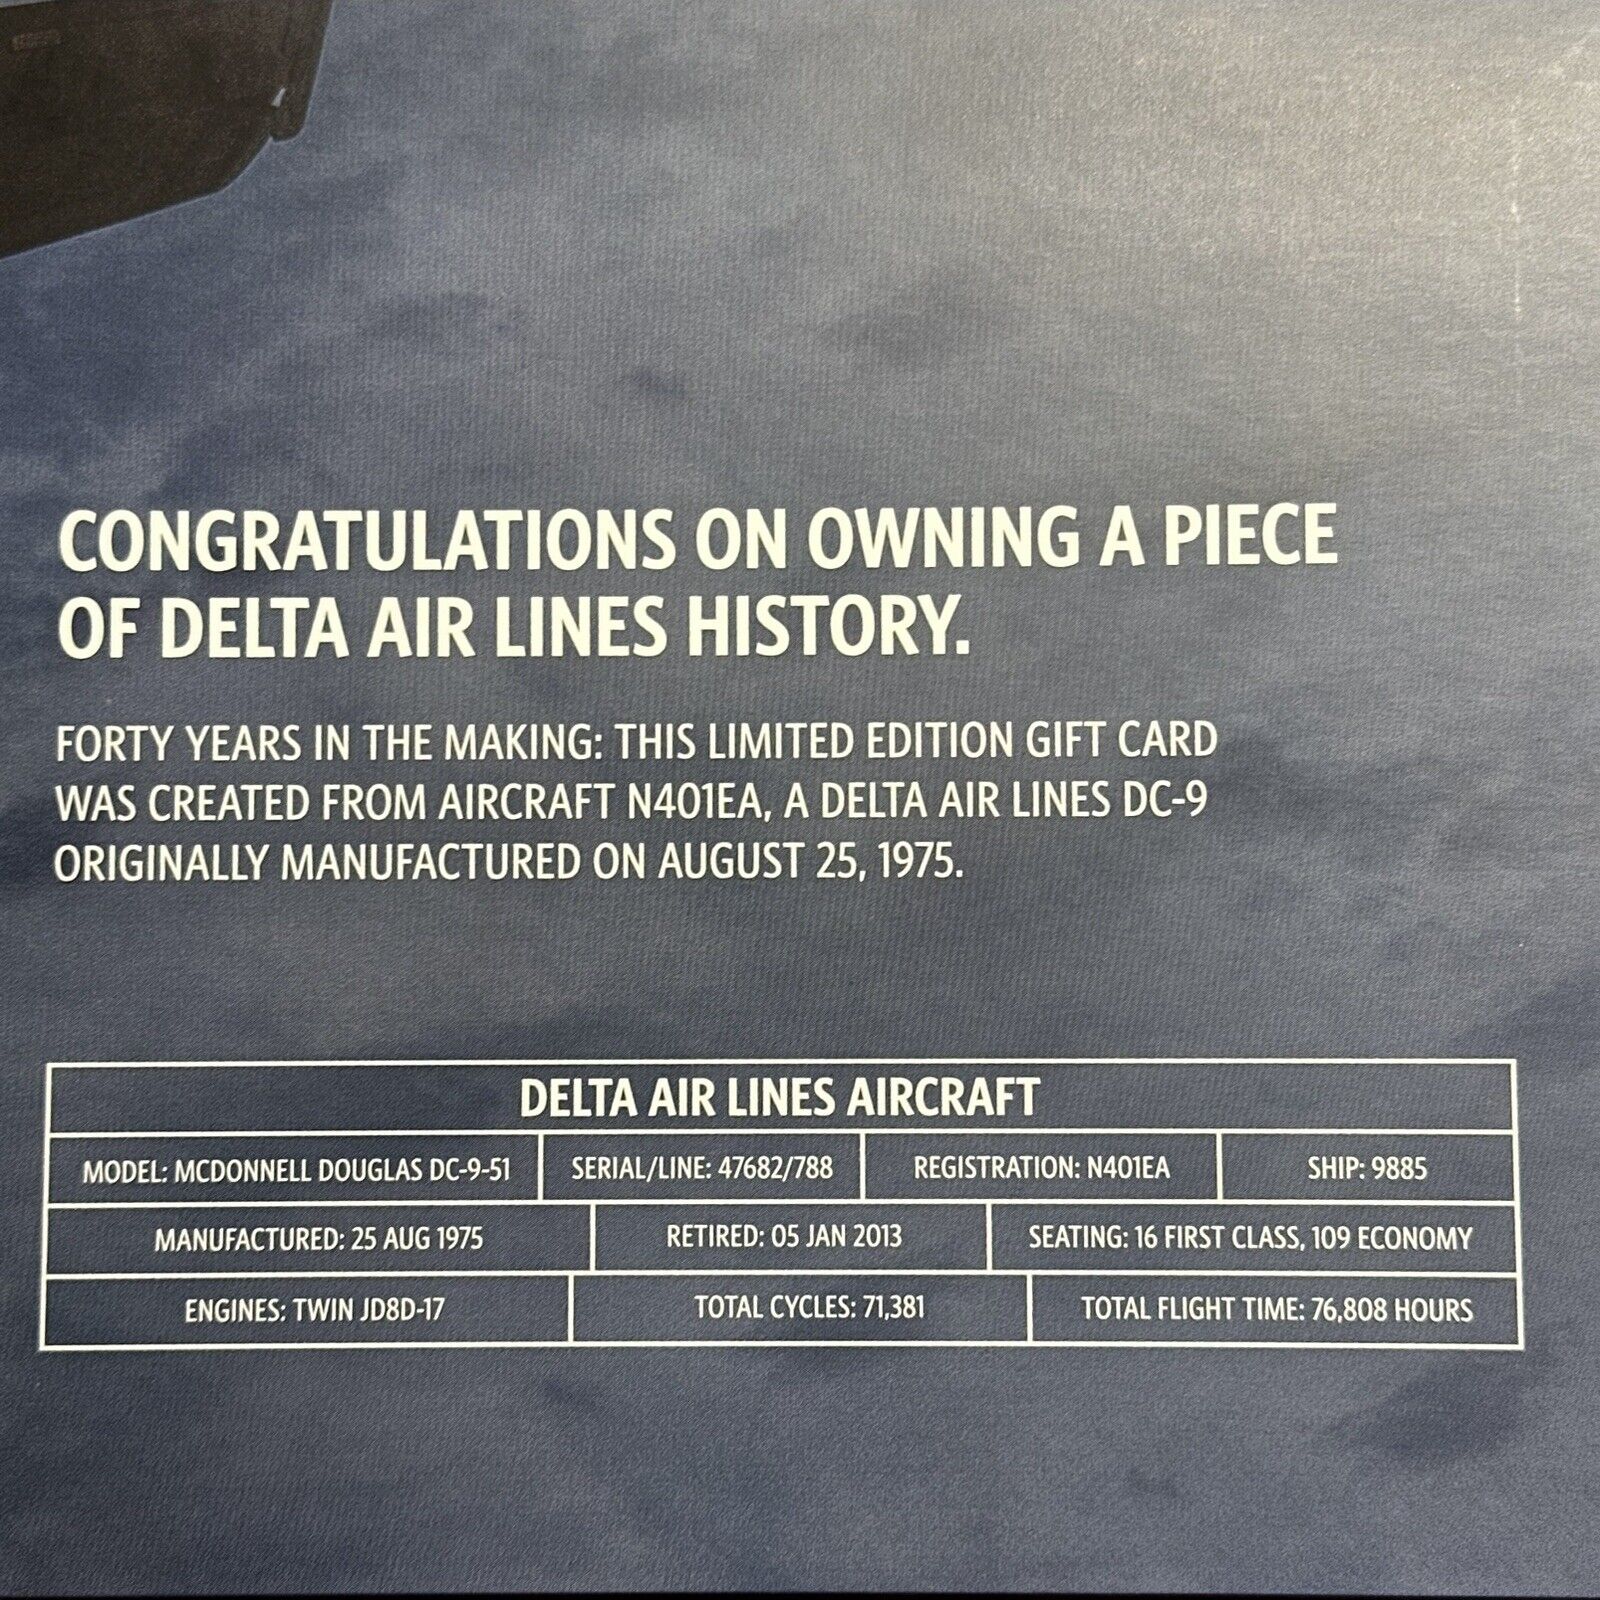 DELTA AIR LINES GIFT CARD Ltd Edition Made From DC-9 metal ($0 VALUE ON CARD)